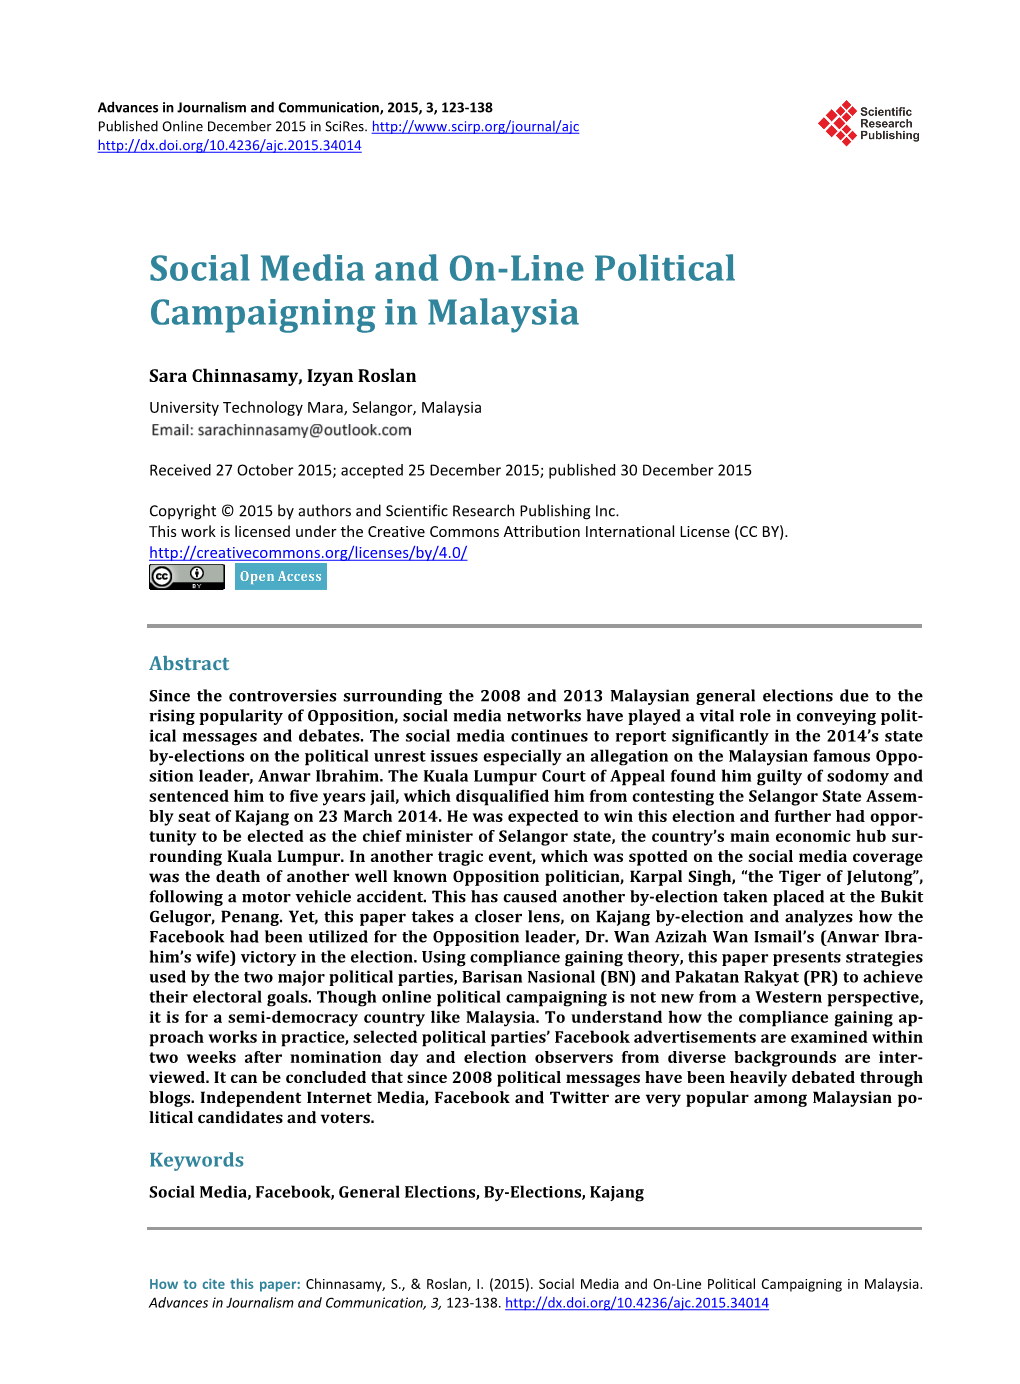 Social Media and On-Line Political Campaigning in Malaysia